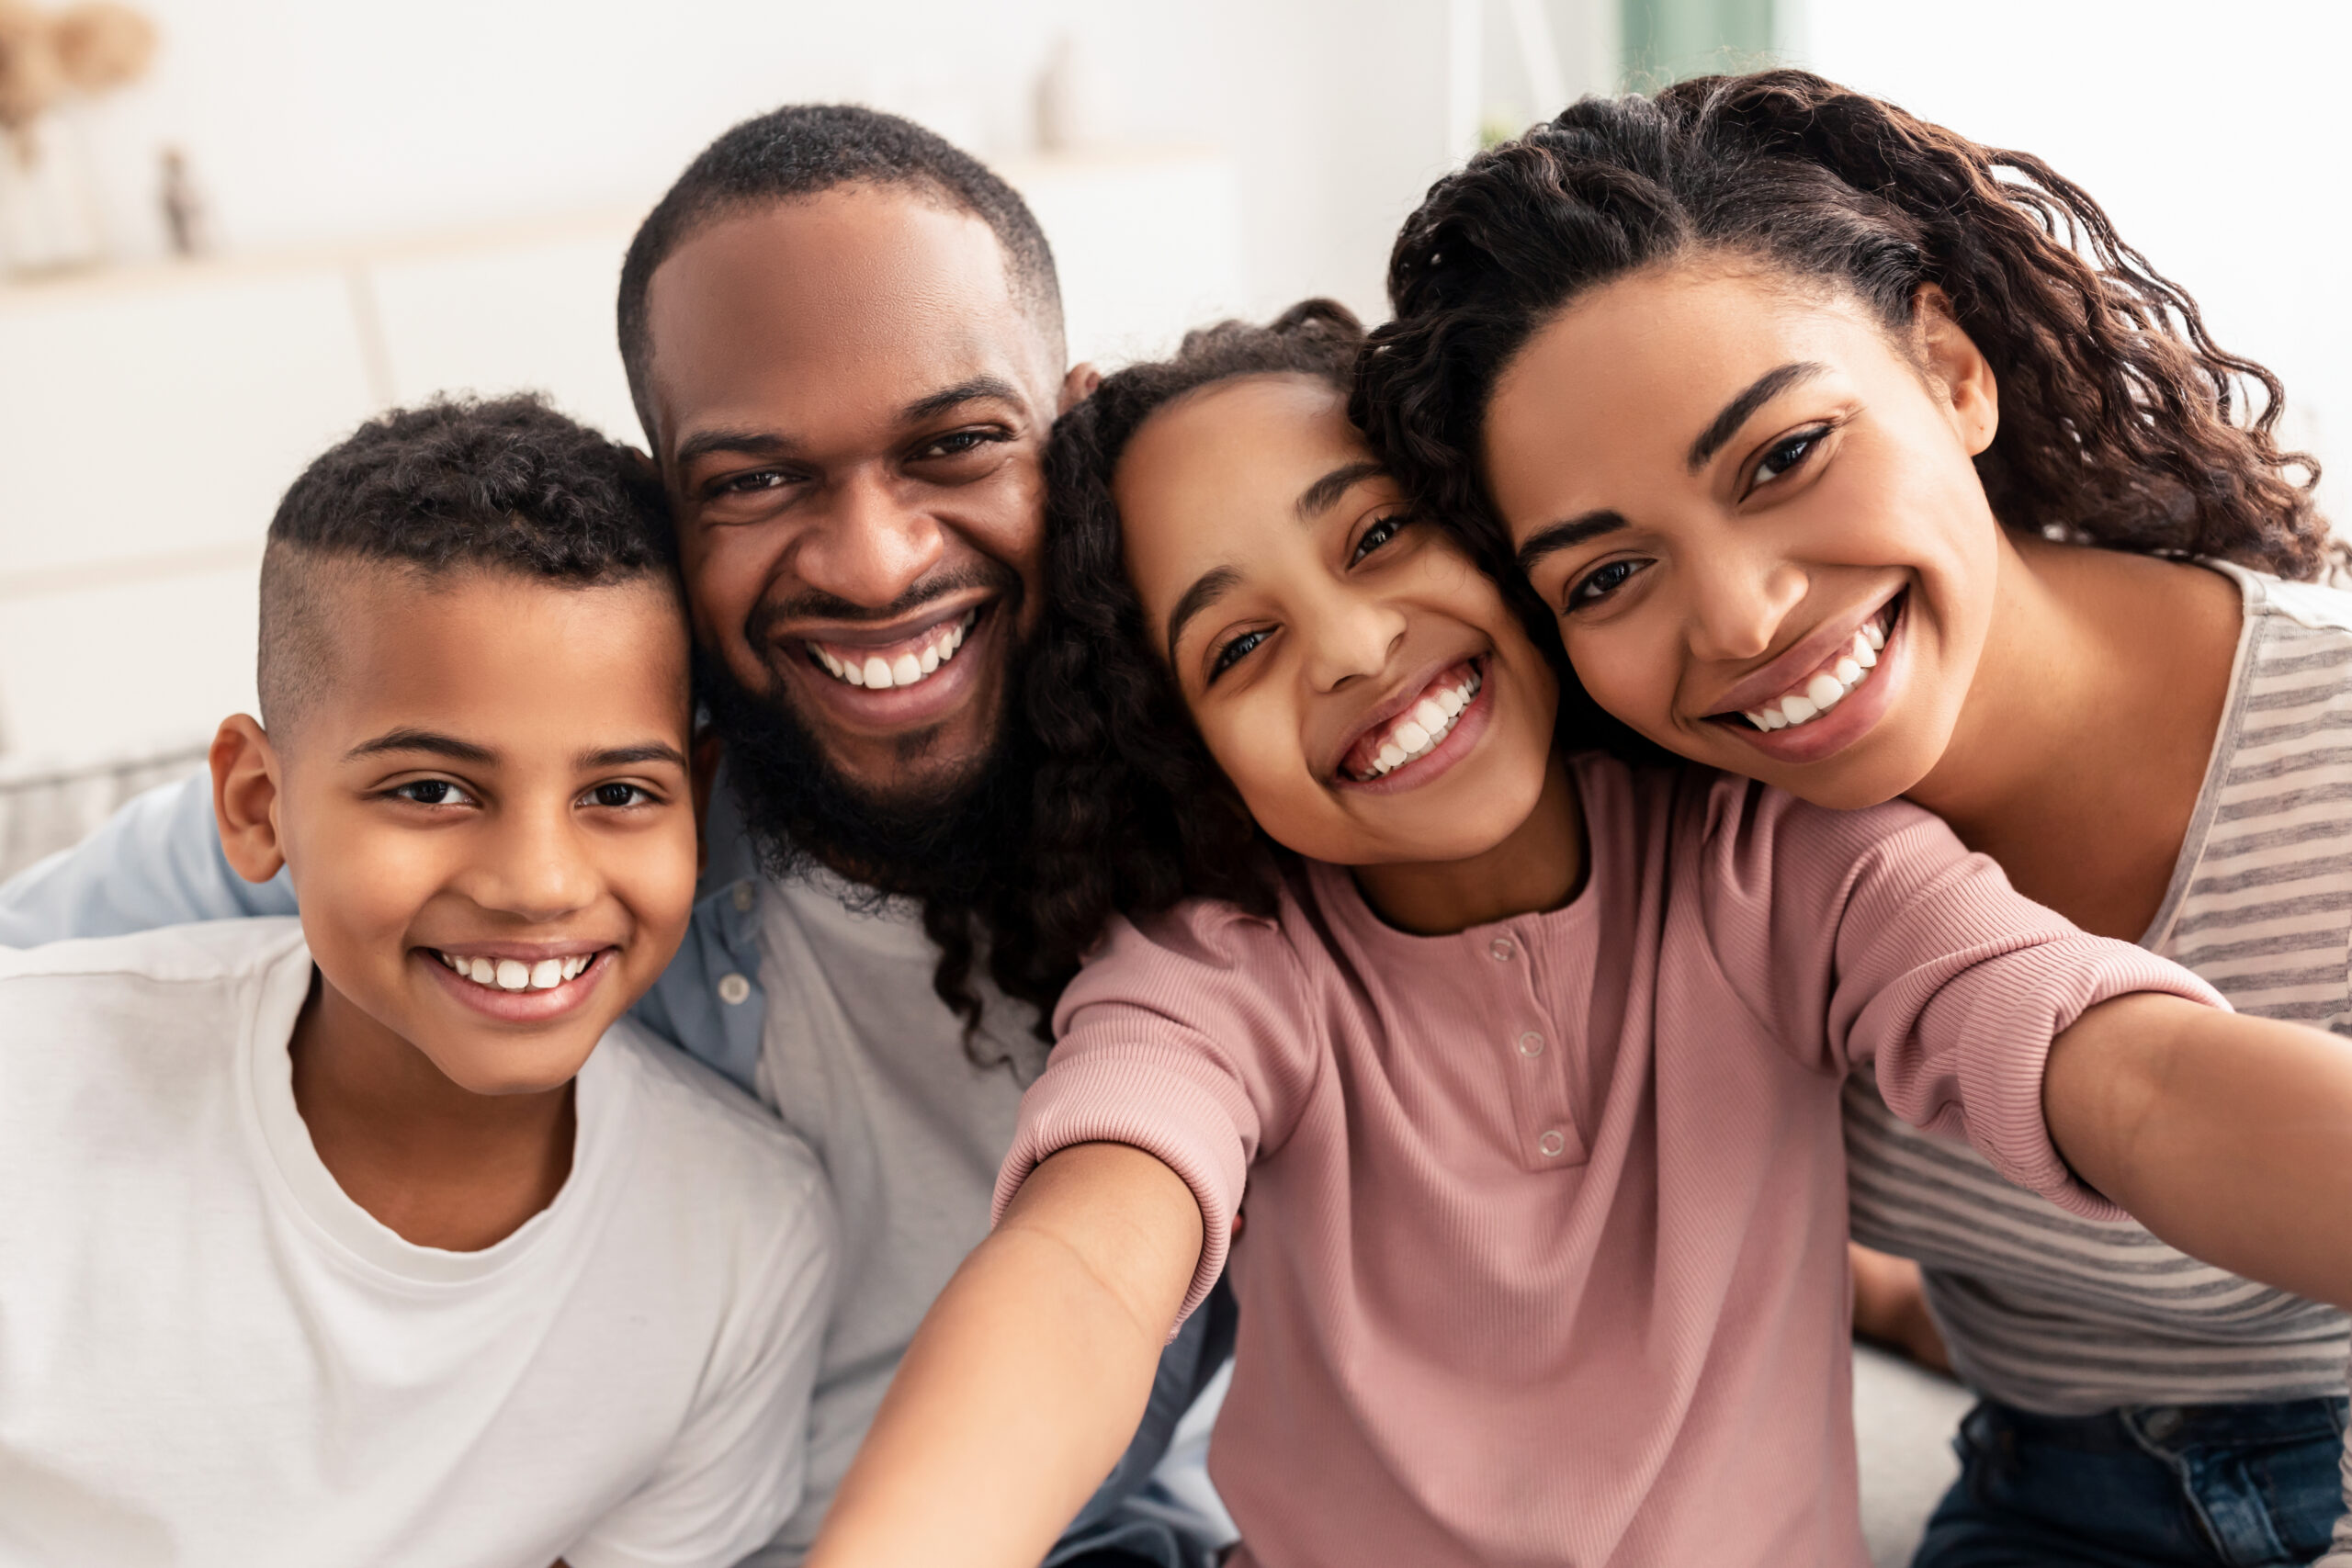 African-American family of 4 including father, mother, elementary school aged son and daughter all smiling